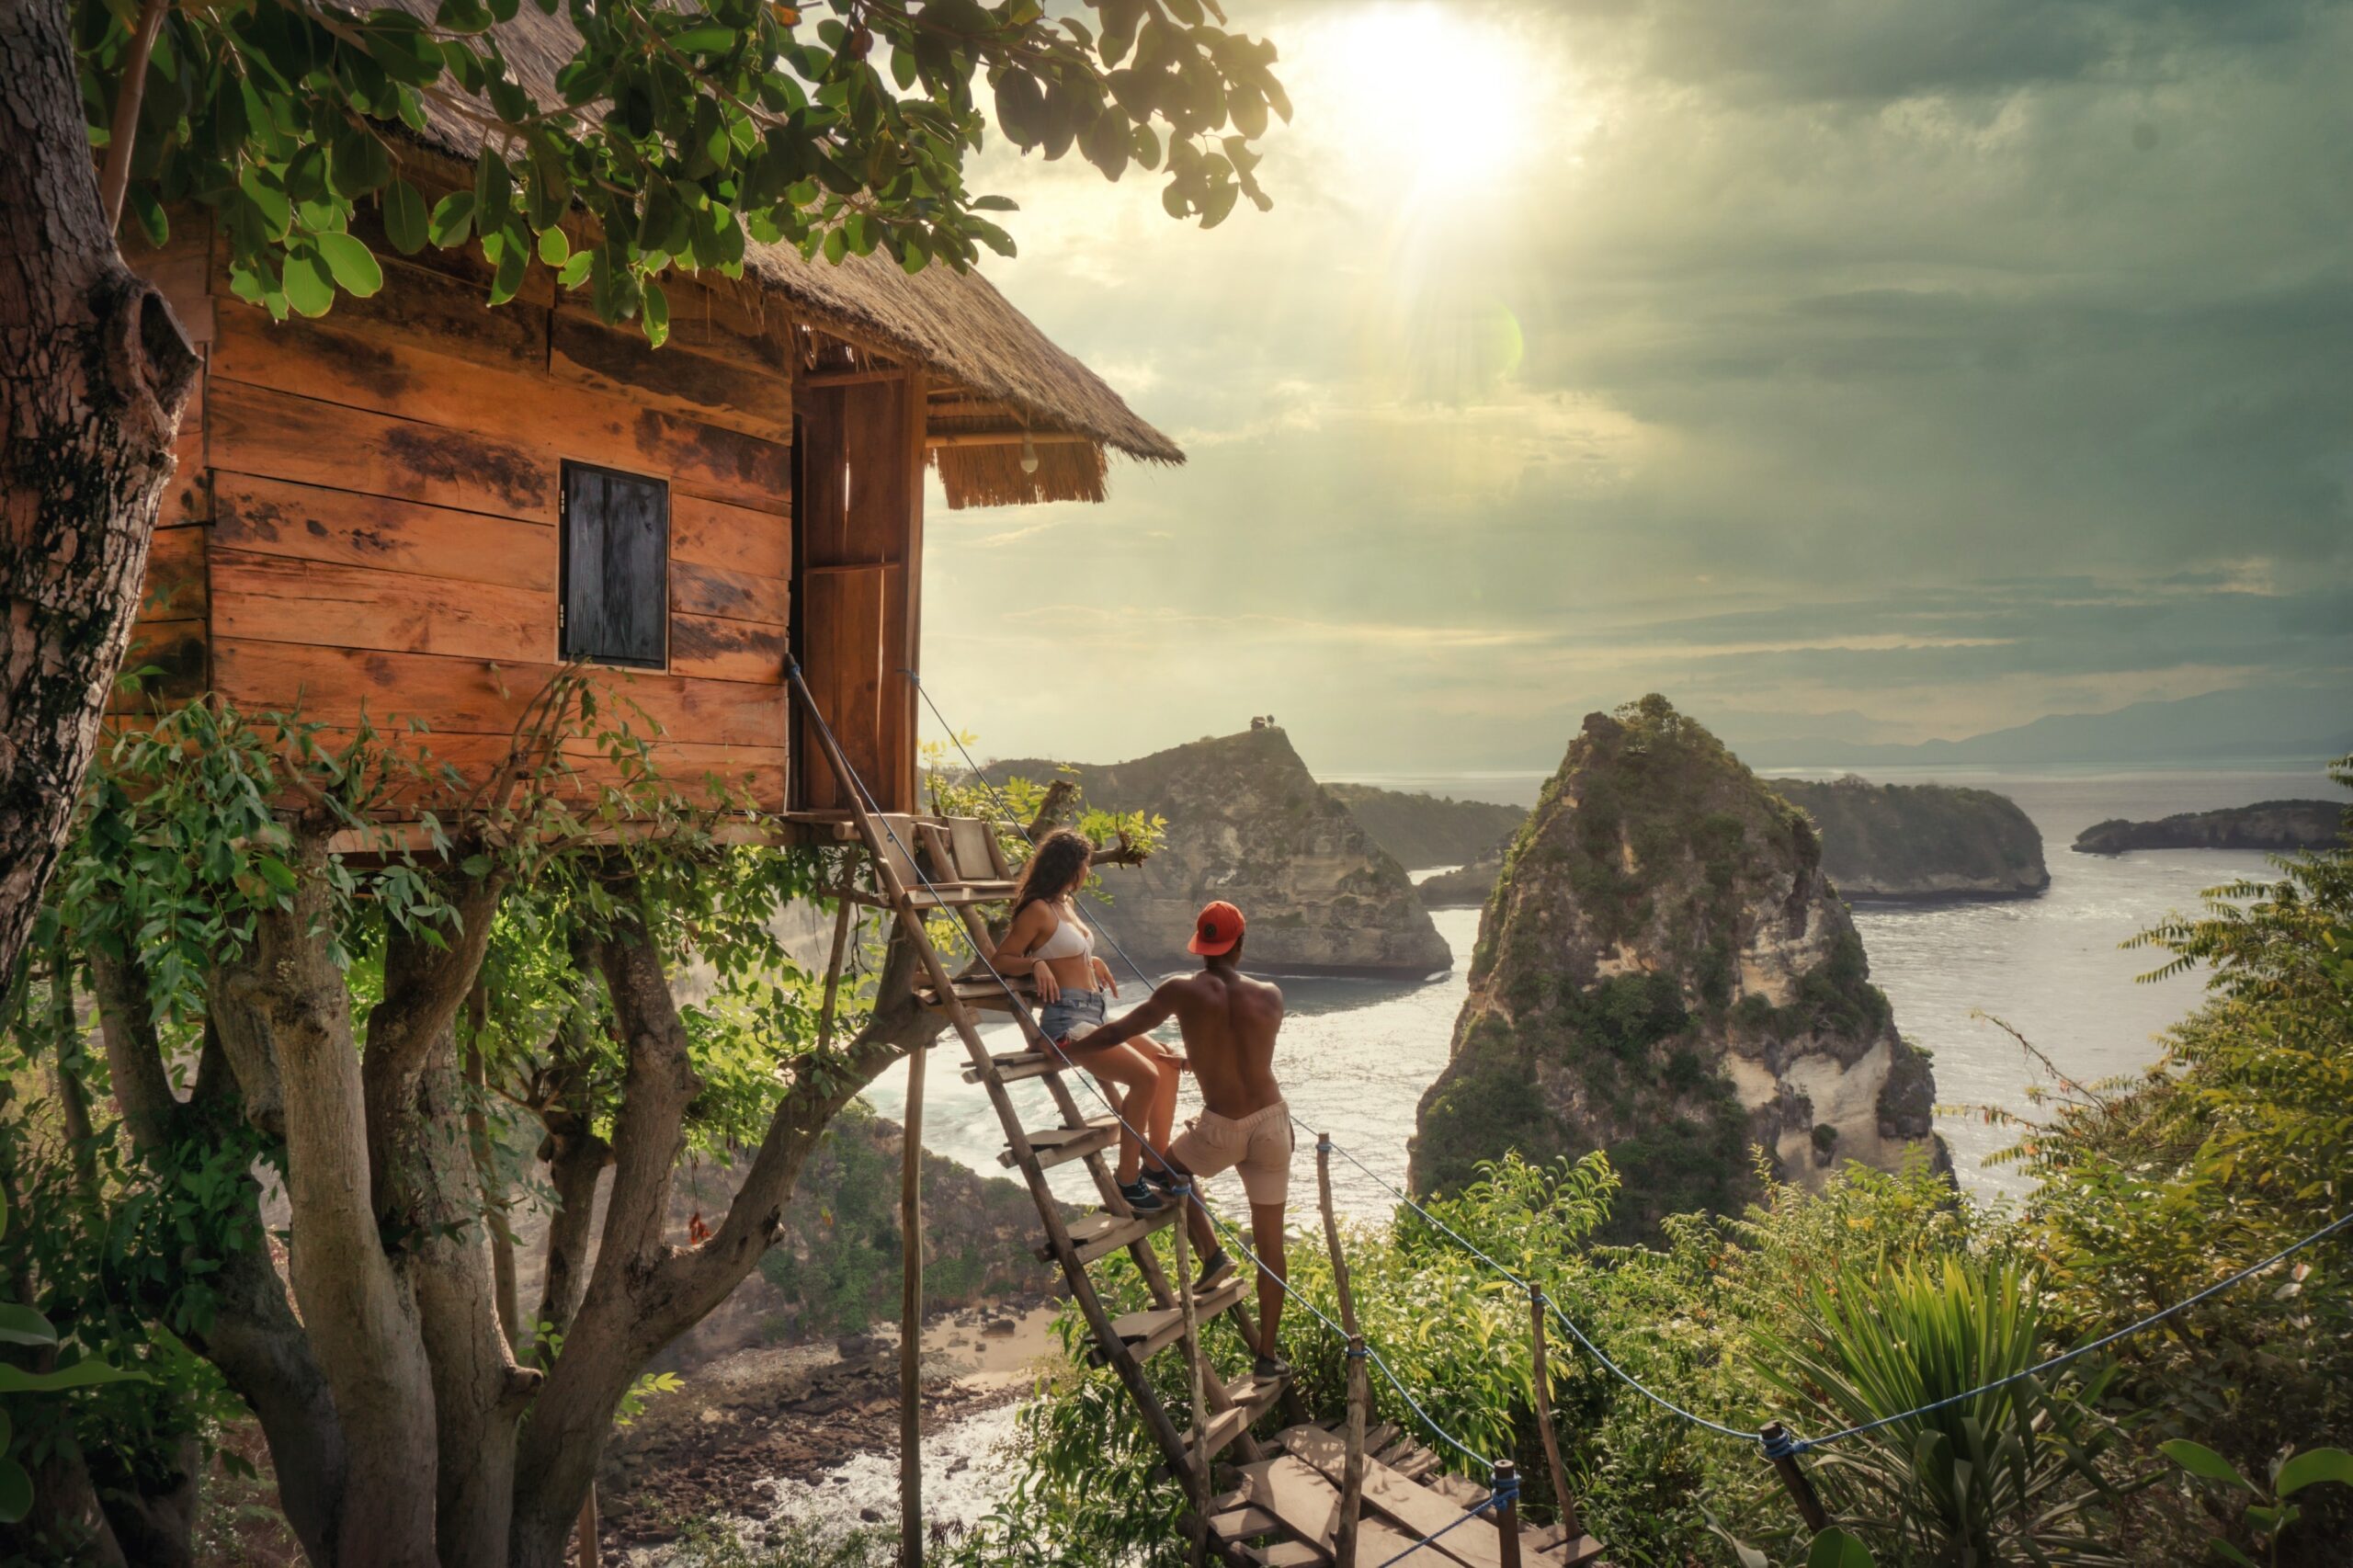 A treehouse in Nusa Penida, Bali, called "Rumah Pahon" sits on the edge of a cliff.